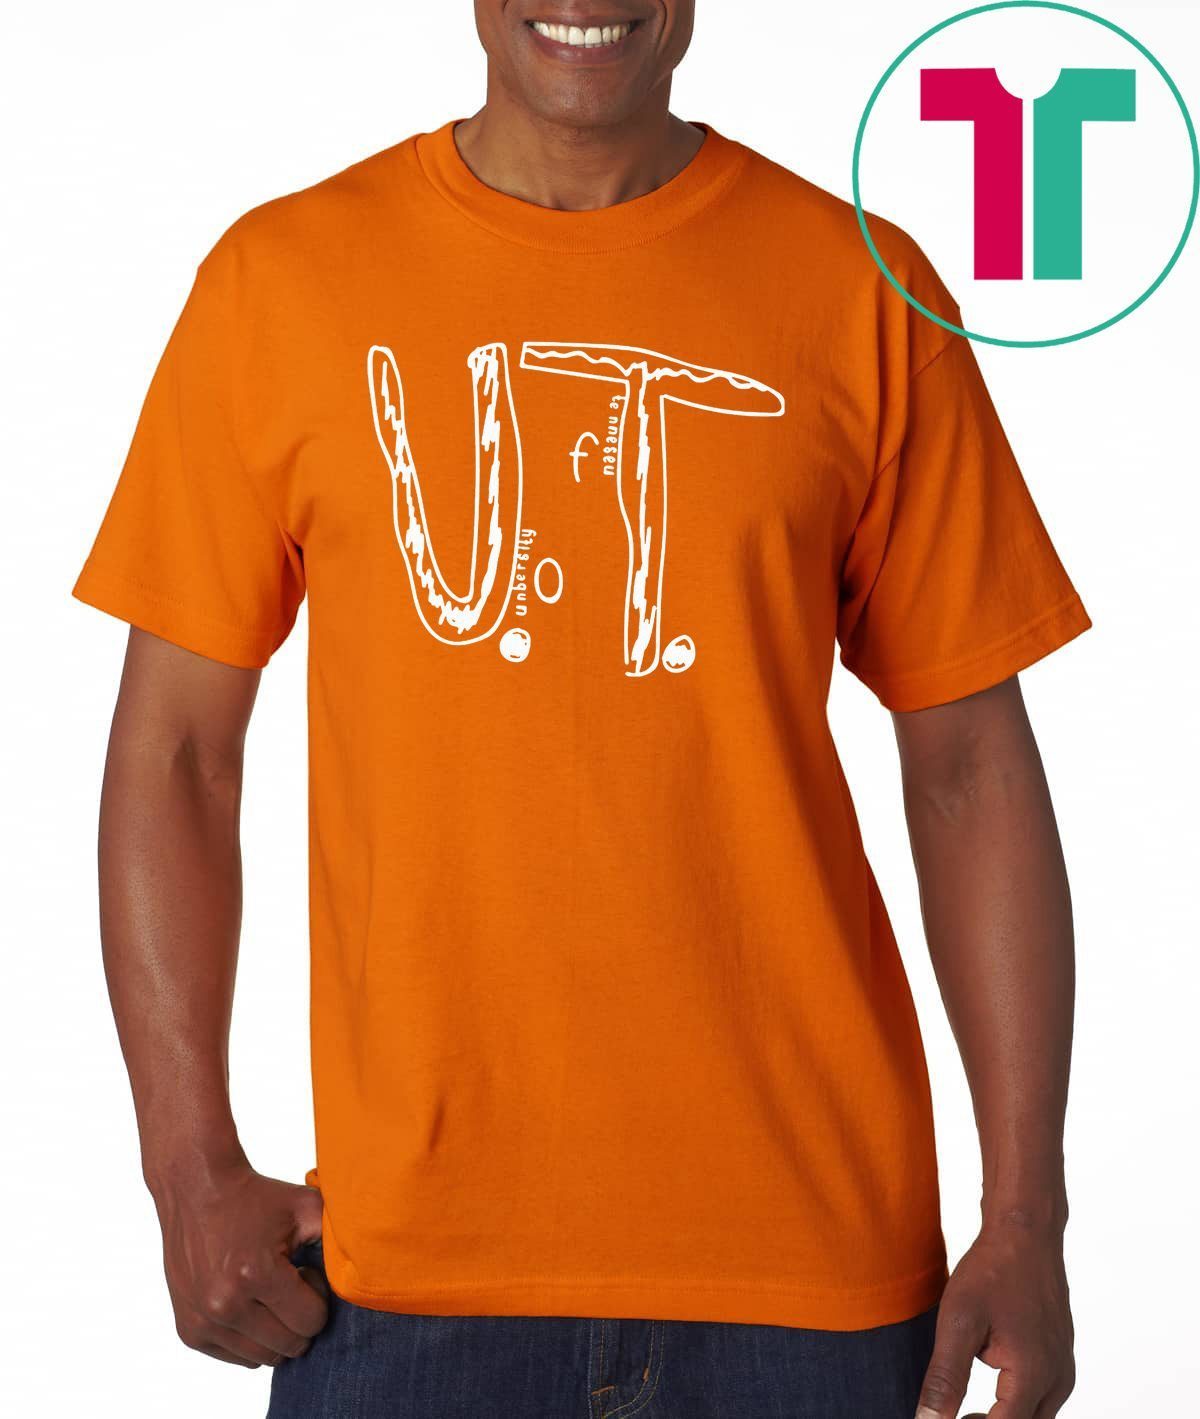 Kid Bullied For UT Bully Offcial T-Shirt - Reviewshirts Office